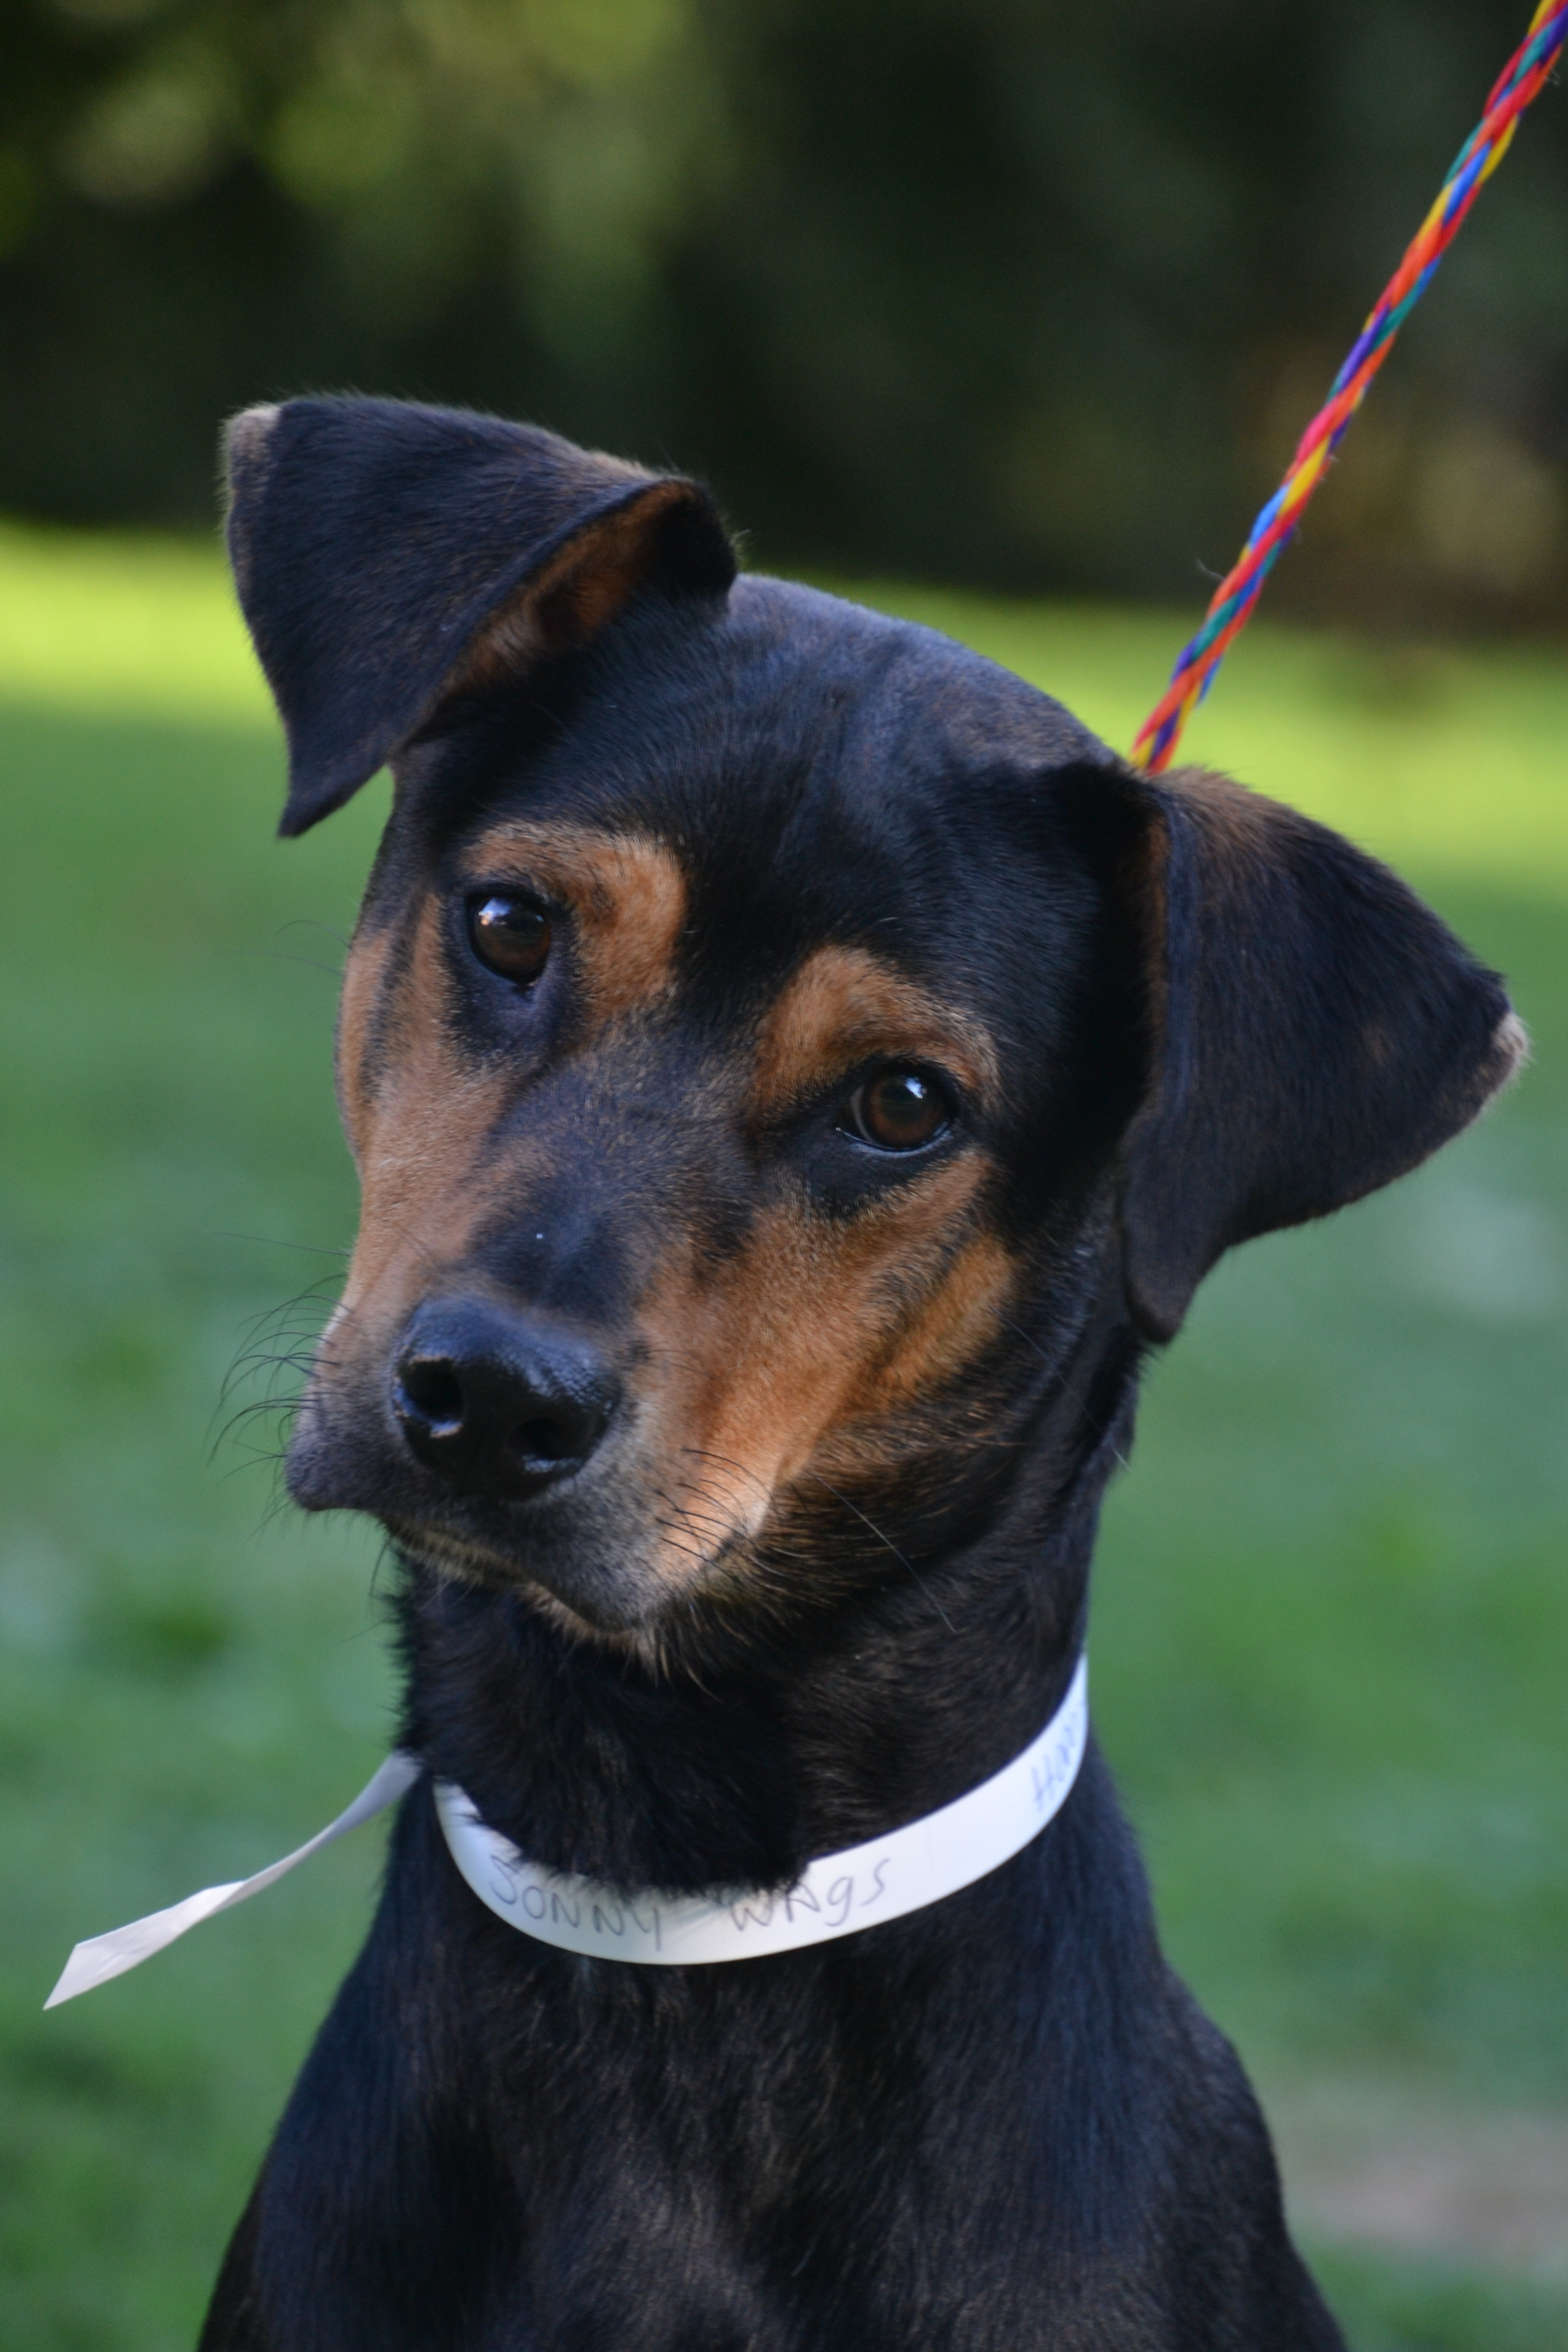 Dog For Adoption Sonny Wags Formerly Known As Southside Talbot A Hound Mix In Horsham Pa Petfinder